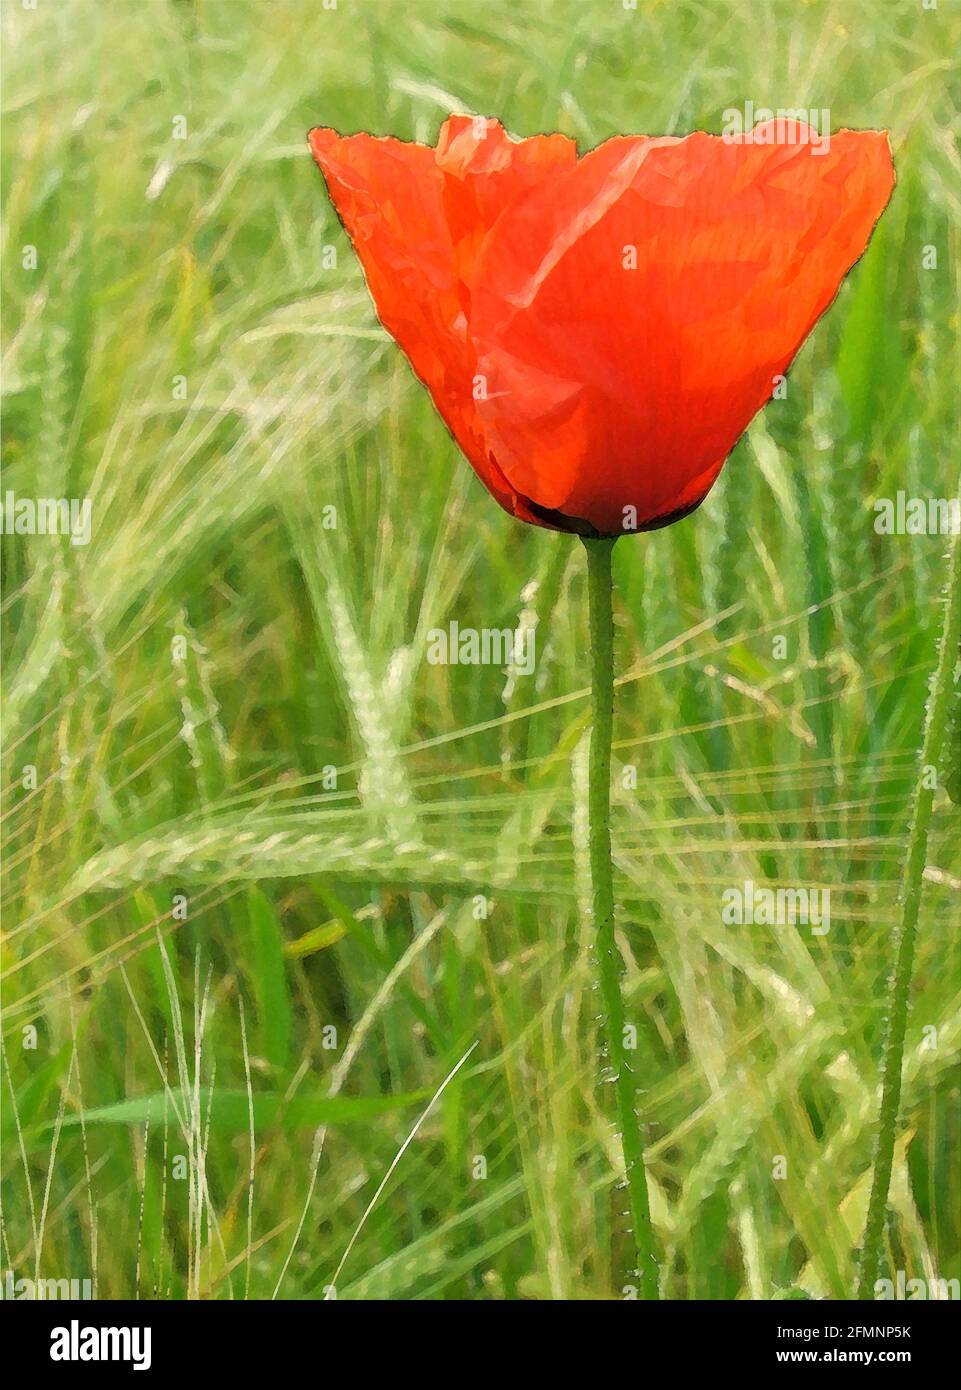 Common Field Poppy (Papaver rhoeas) One of Forty-two Iconic Images of English Garden Flowers, Wildflowers and Rural Landscapes. Stock Photo